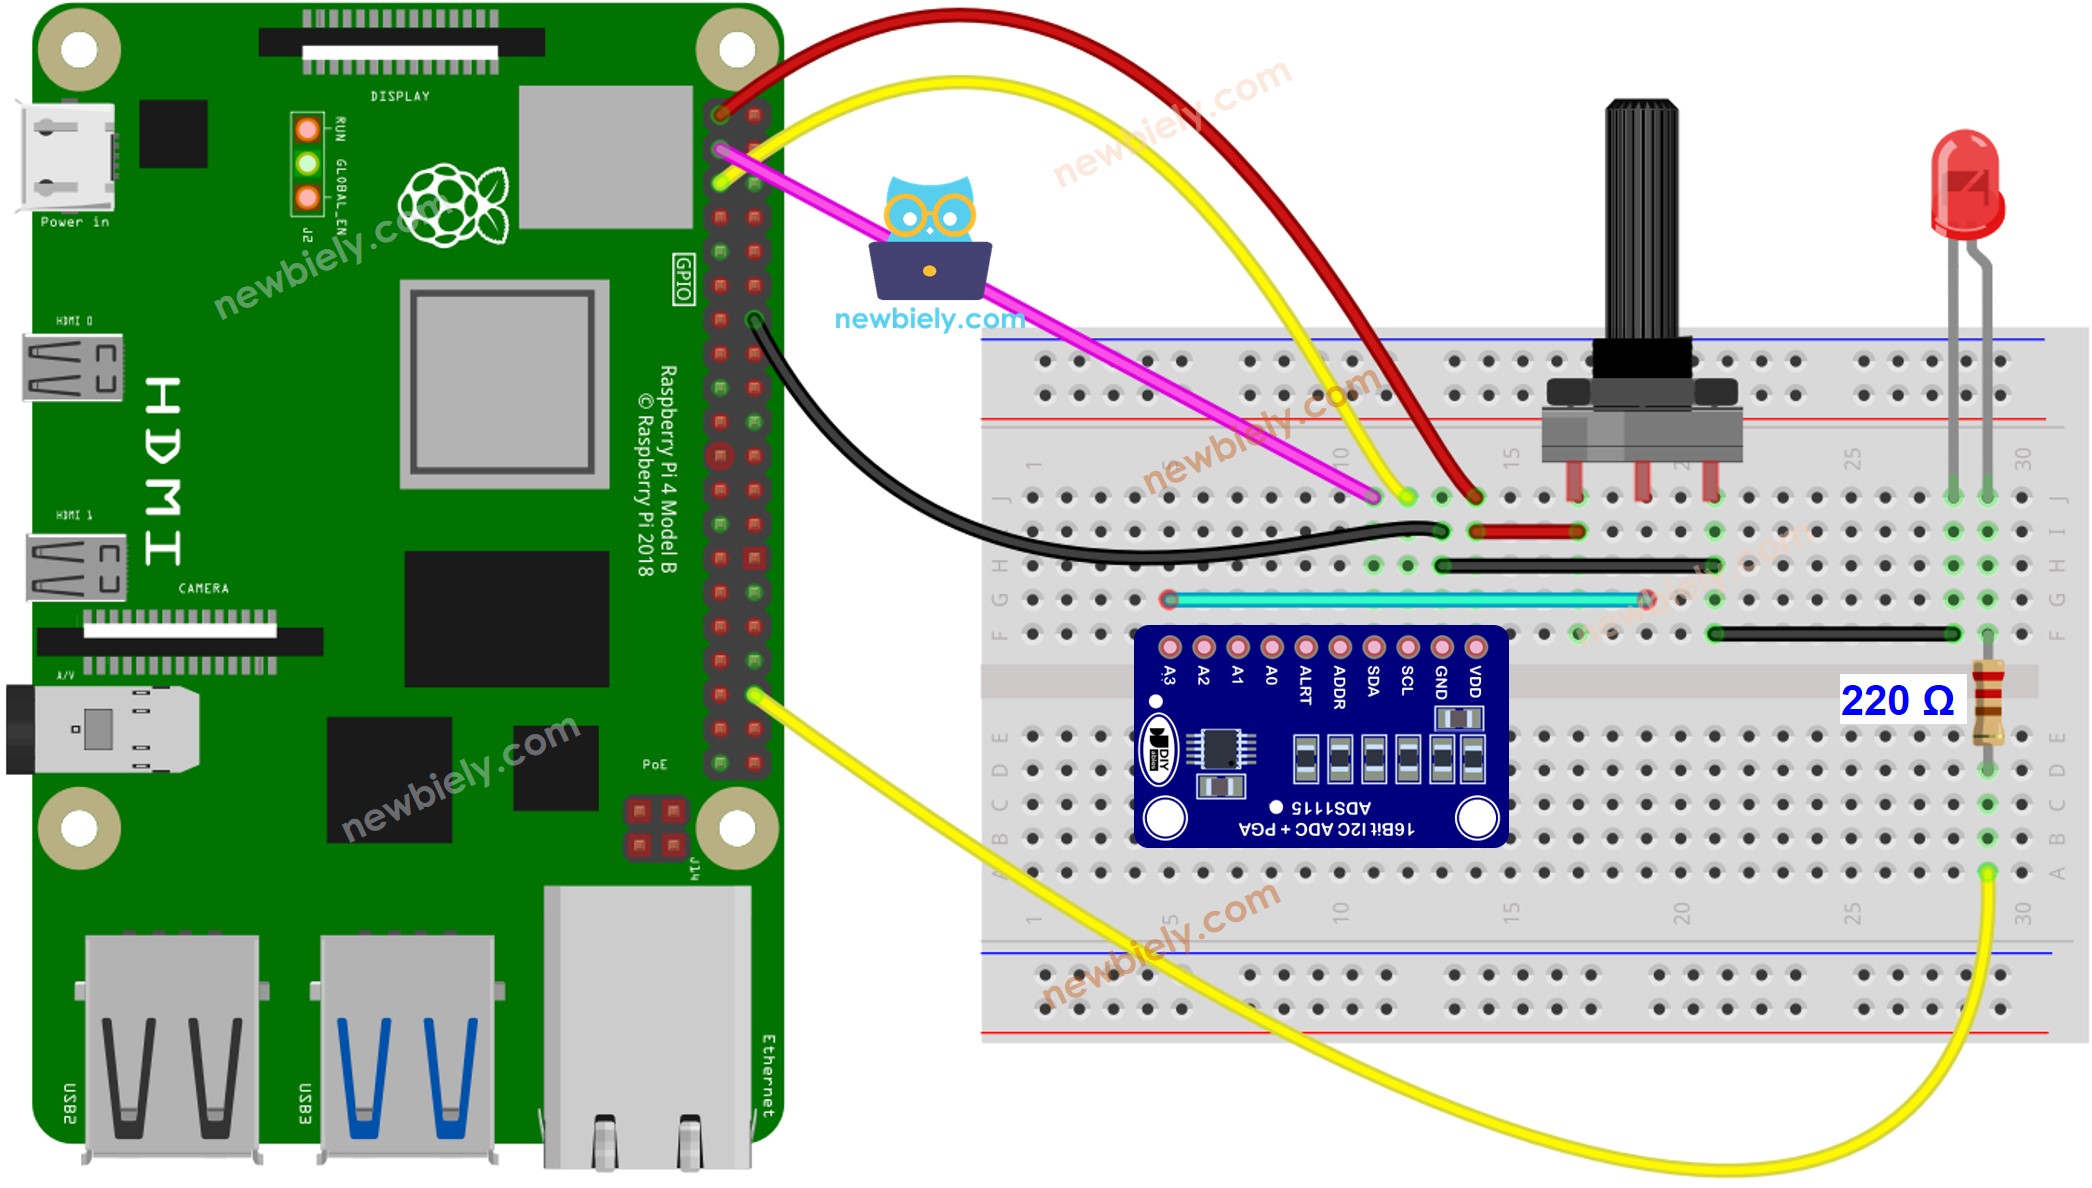 The wiring diagram between Raspberry Pi and Potentiometer LED